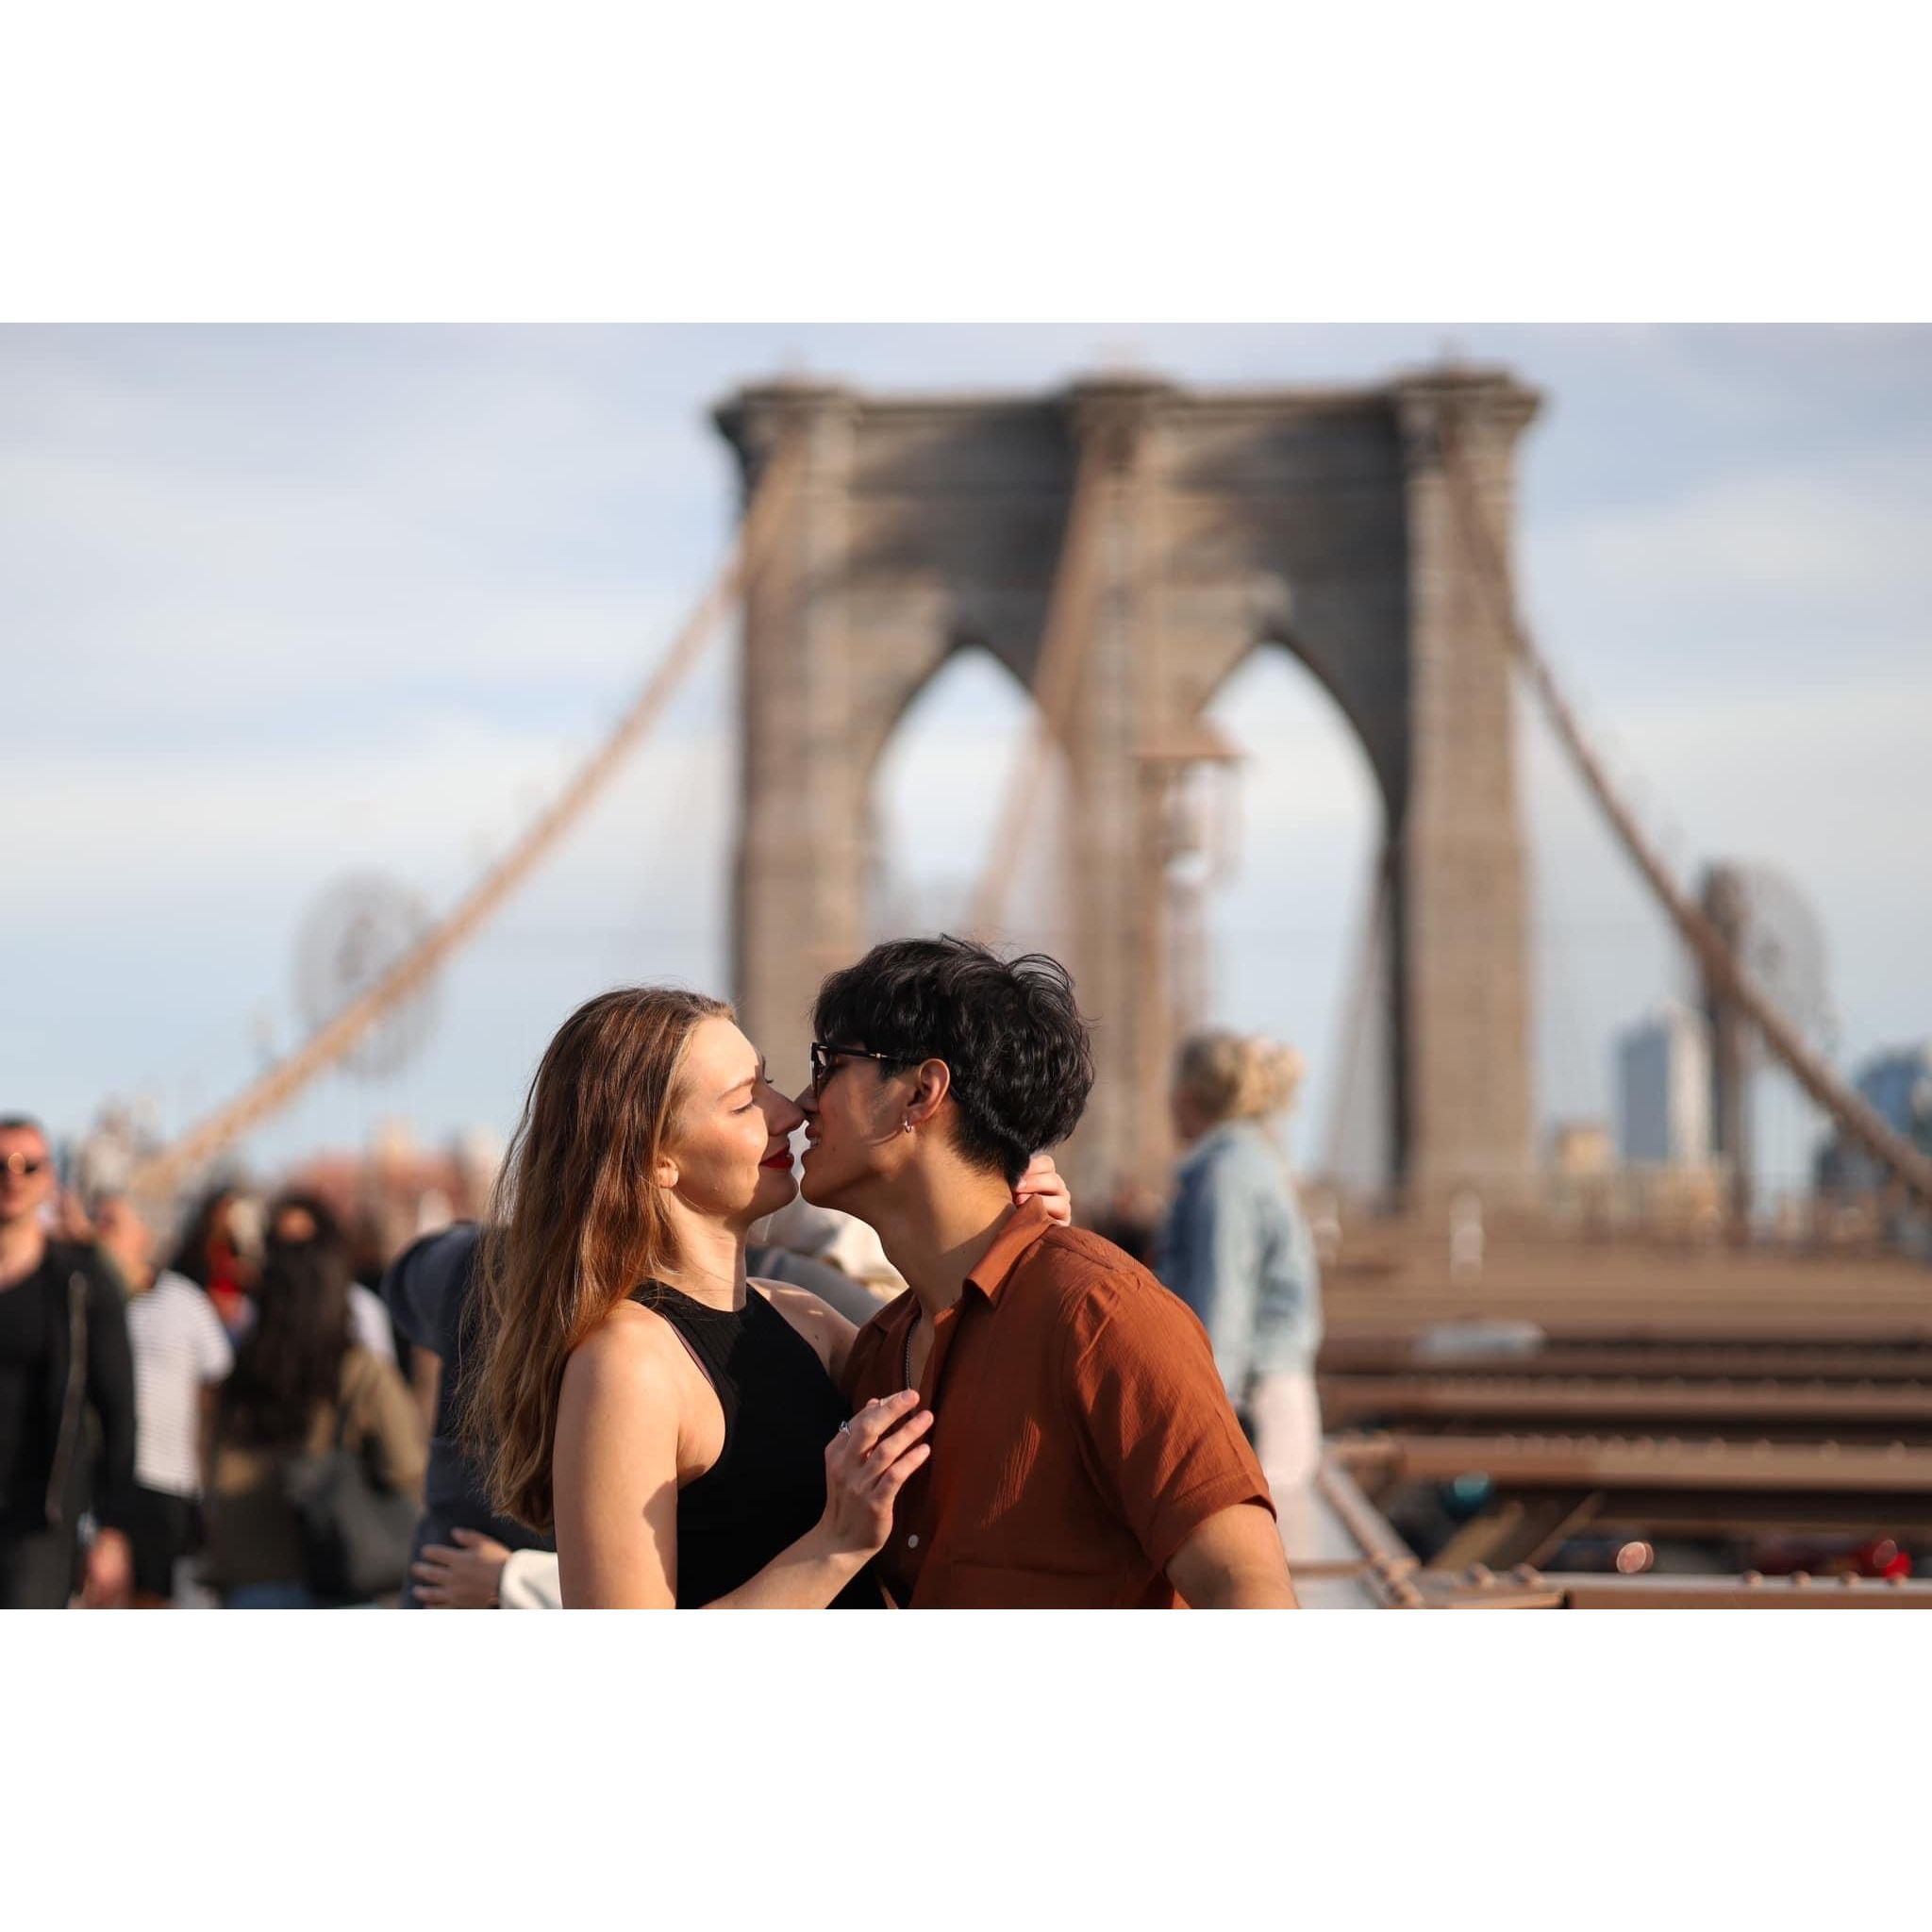 And of course a Brooklyn Bridge moment was needed, but this was also the first photoshoot we did as a couple.